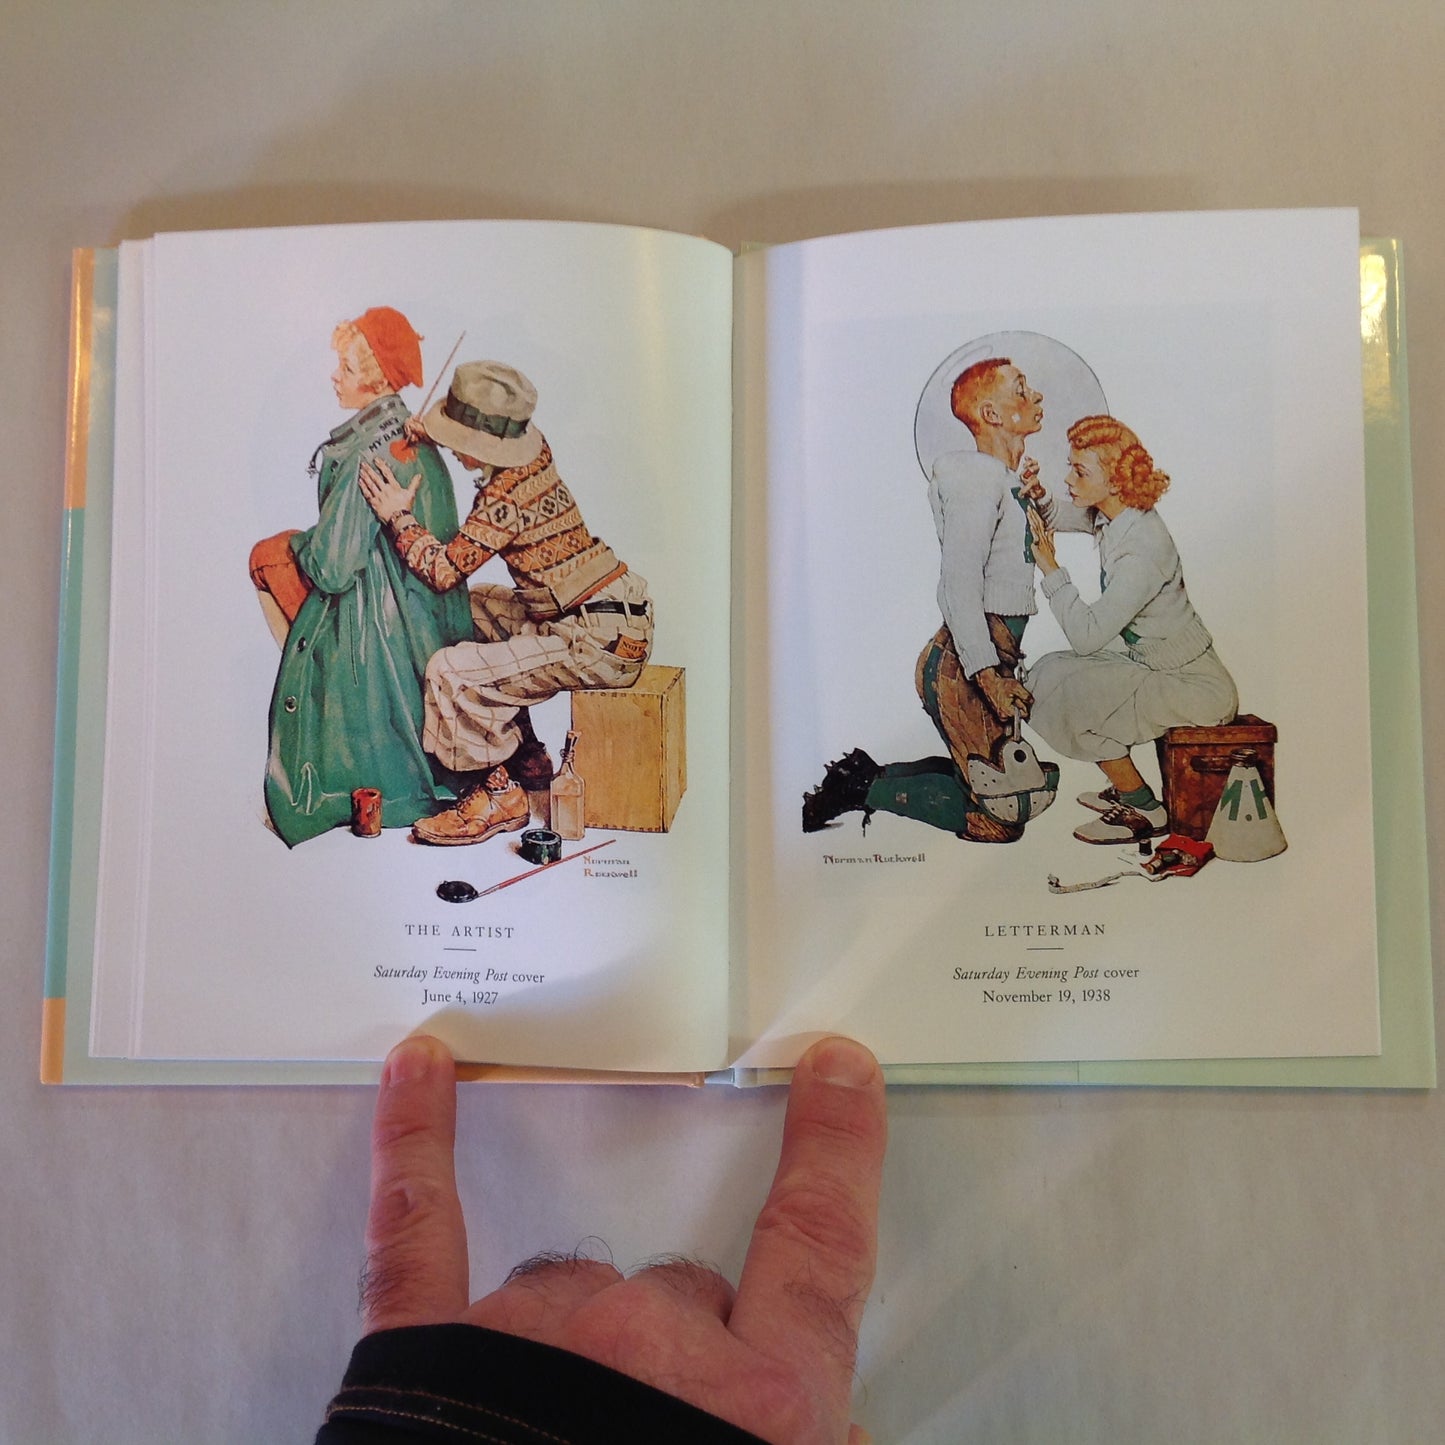 Vintage 1993 Hardcover Gift Book Norman Rockwell: Romance